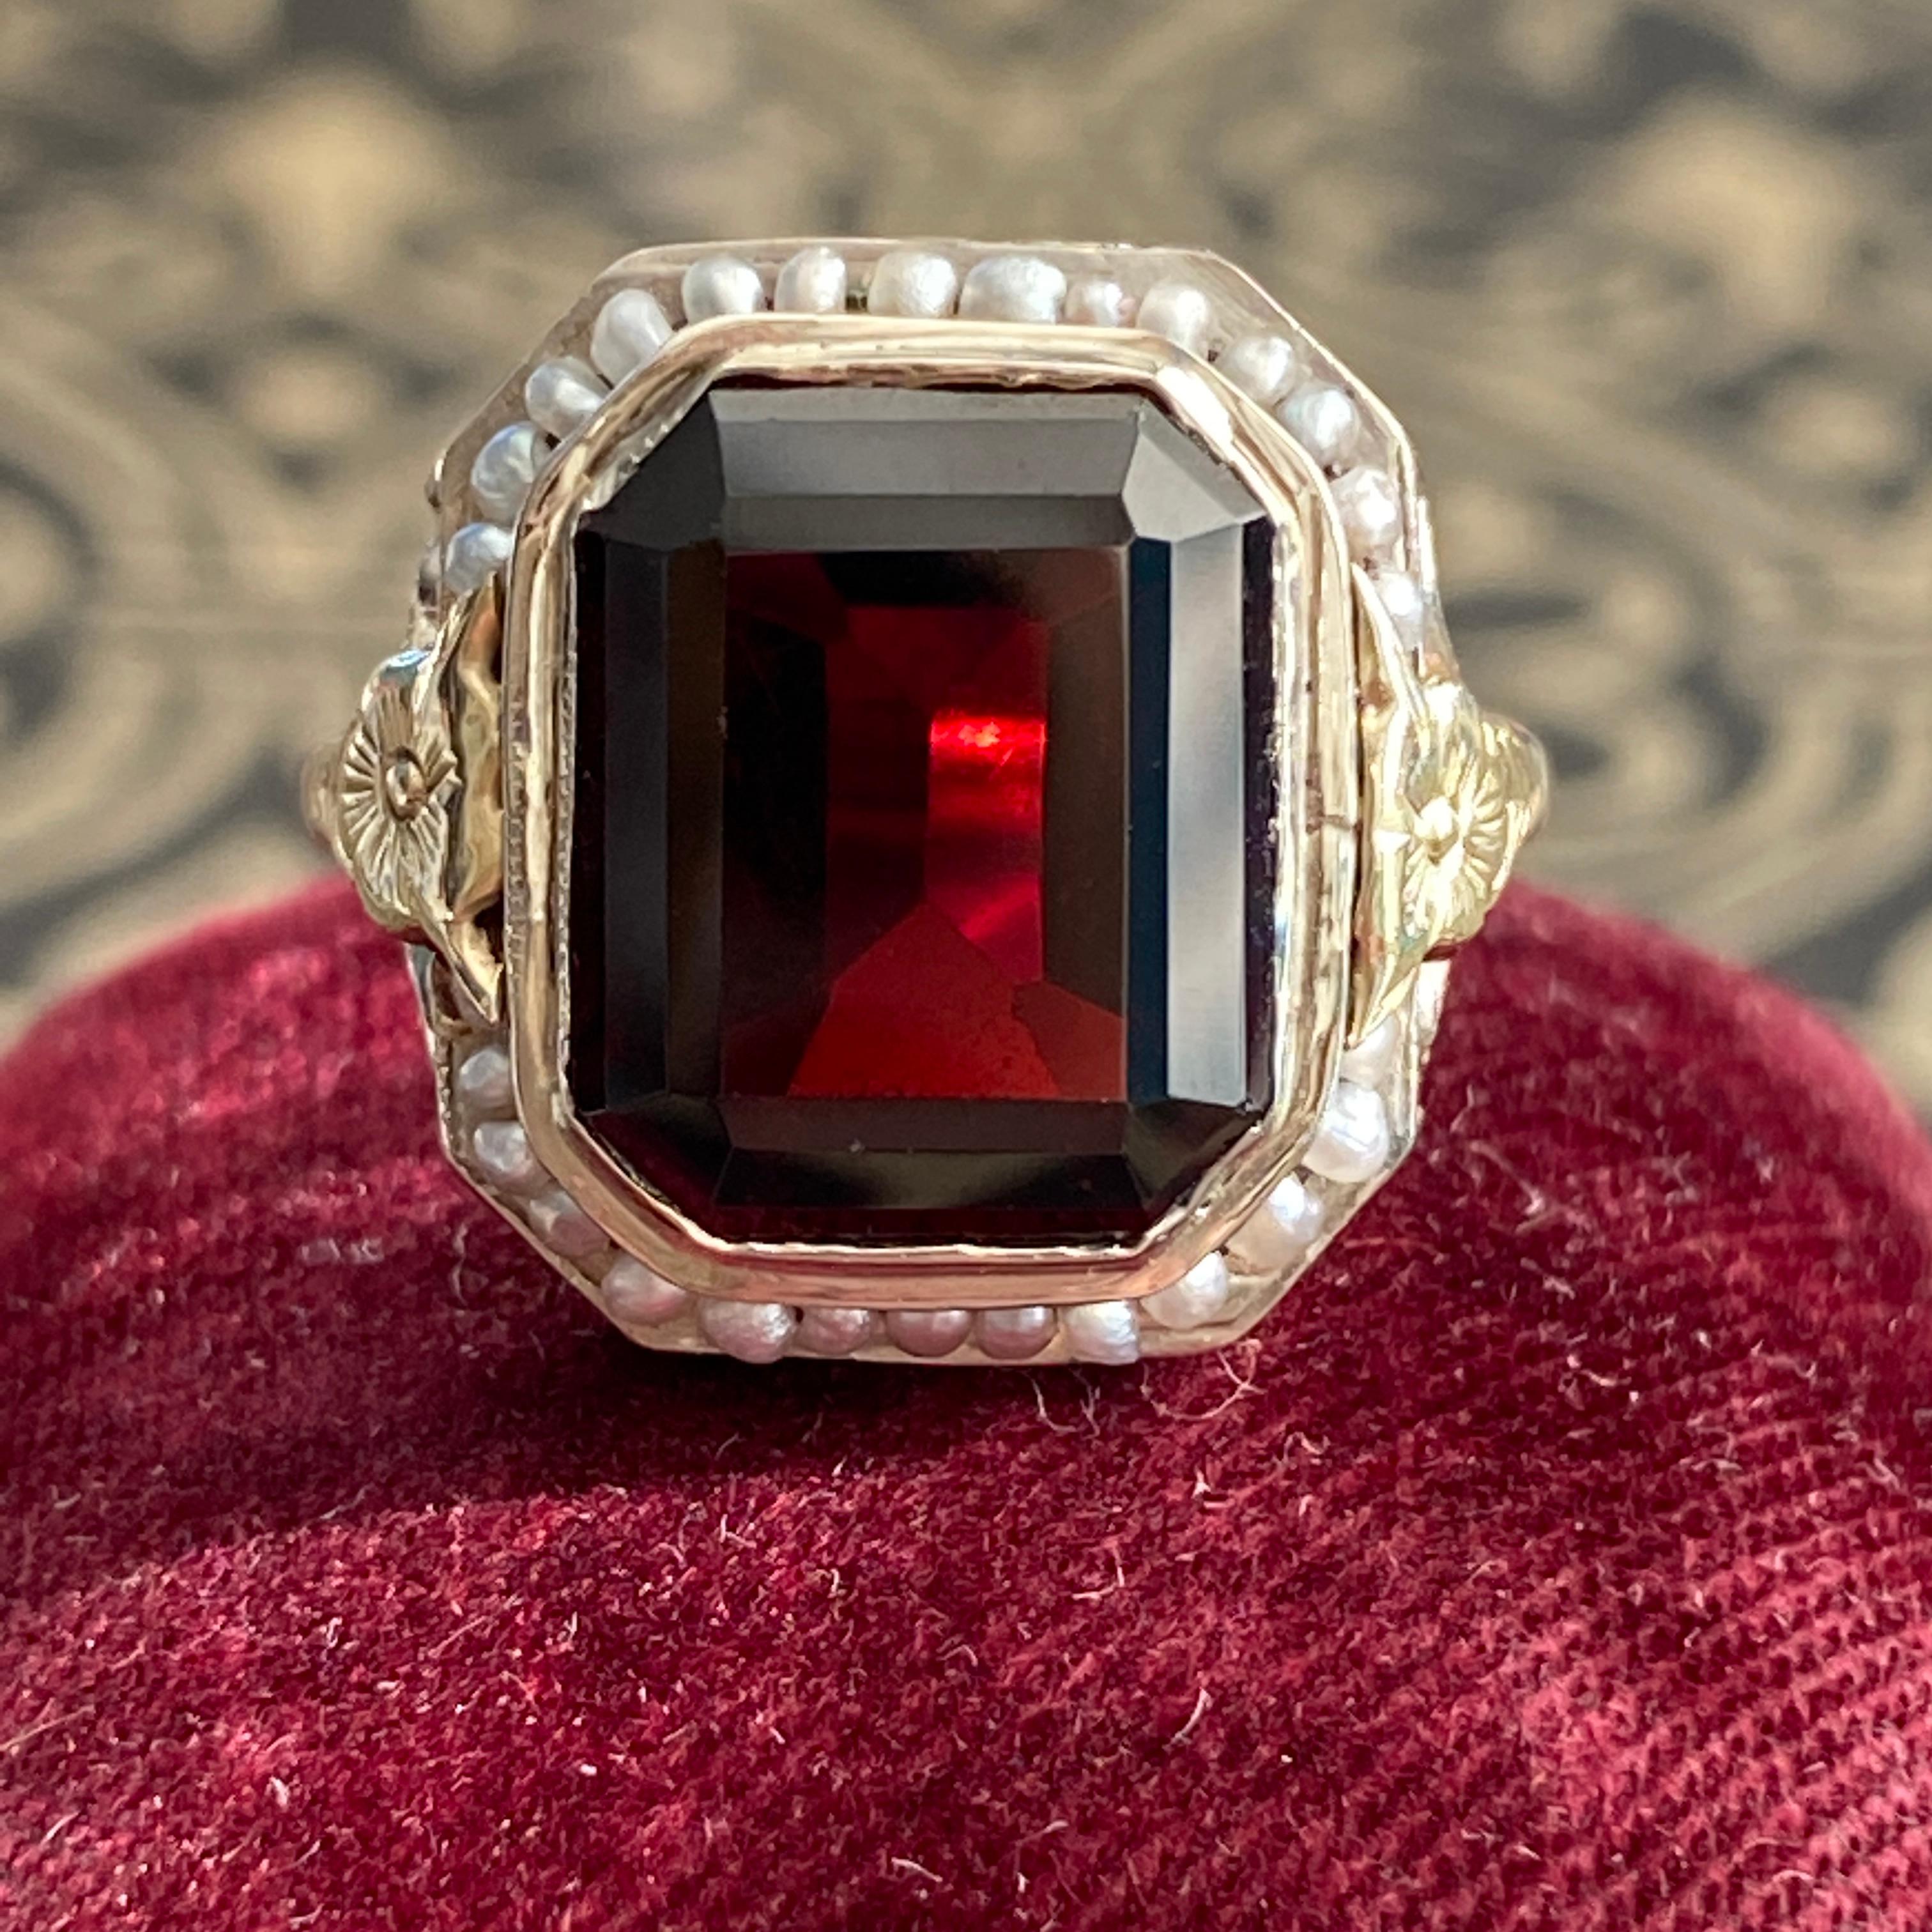 Details: 
A beautiful deep red garnet ring from the Edwardian Era (ca 1900's) era. This lovely two tone ring is crafted in 14K white gold with yellow gold details. The filigree on the sides of the setting is sweetly decorated with with pansy flowers